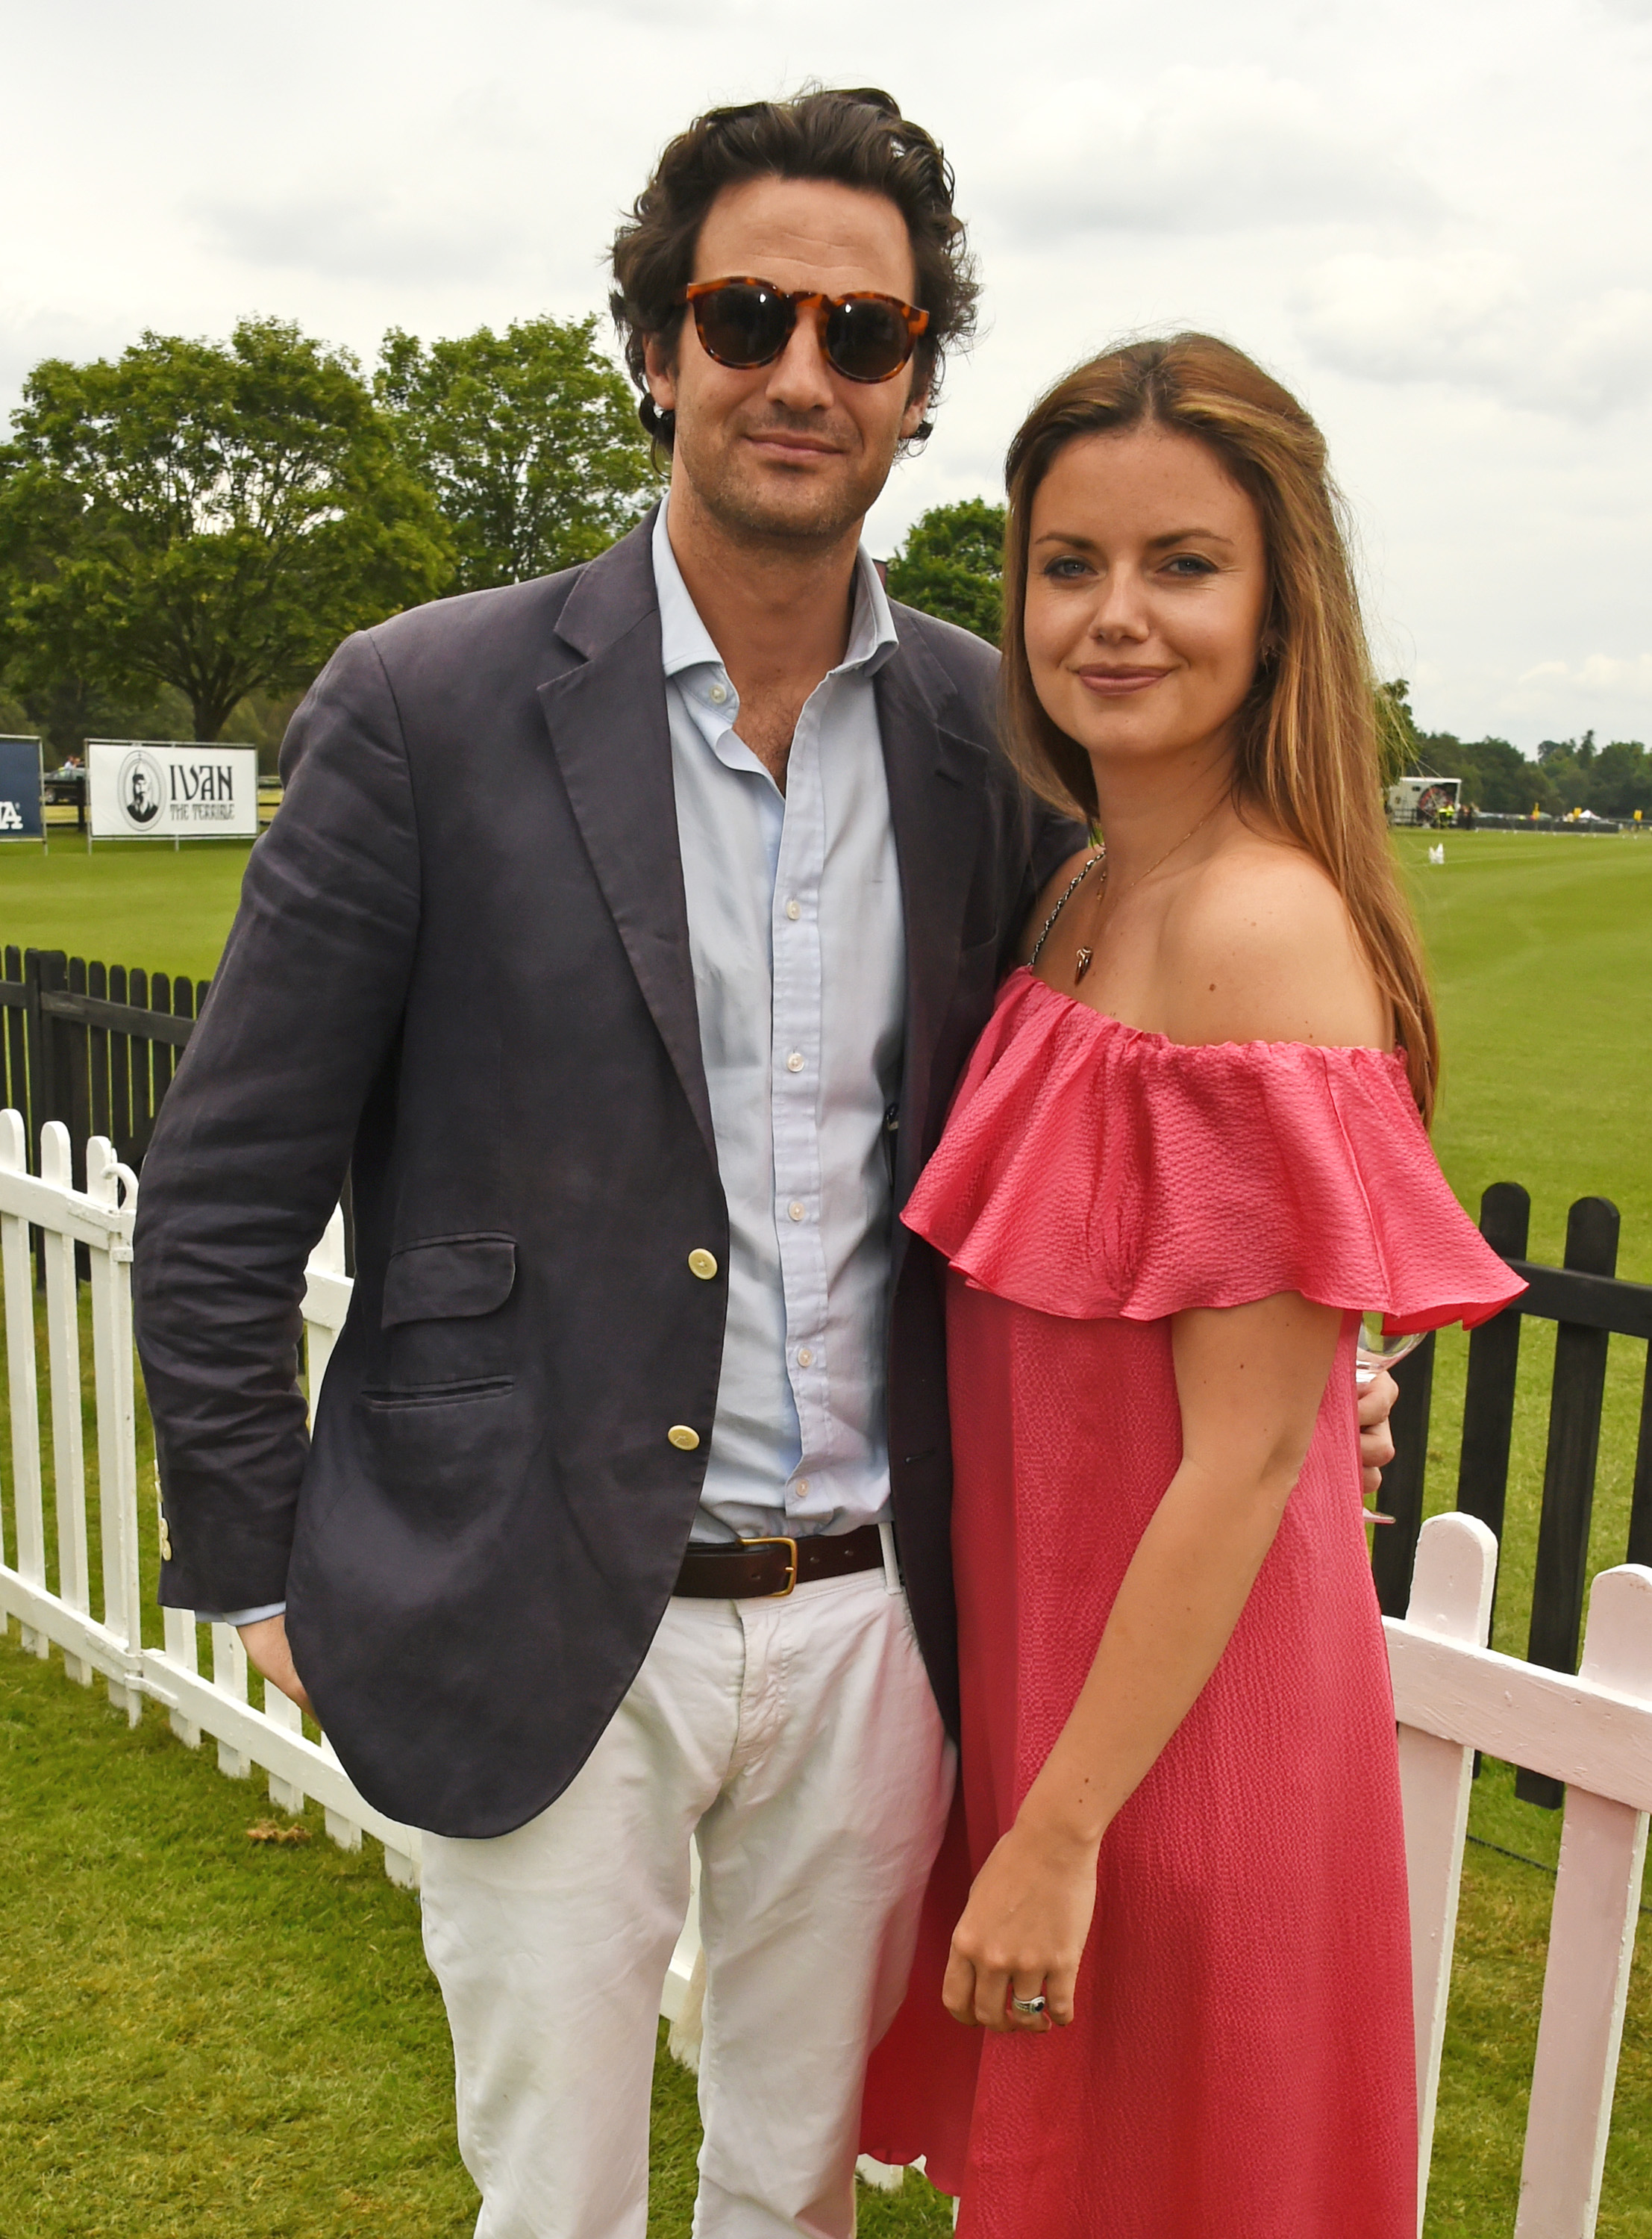 Rupert Finch and Lady Natasha Rufus Isaacs attend The Cartier Queen's Cup Final at Guards Polo Club on June 11, 2016 in Egham, England. | Source: Getty Images